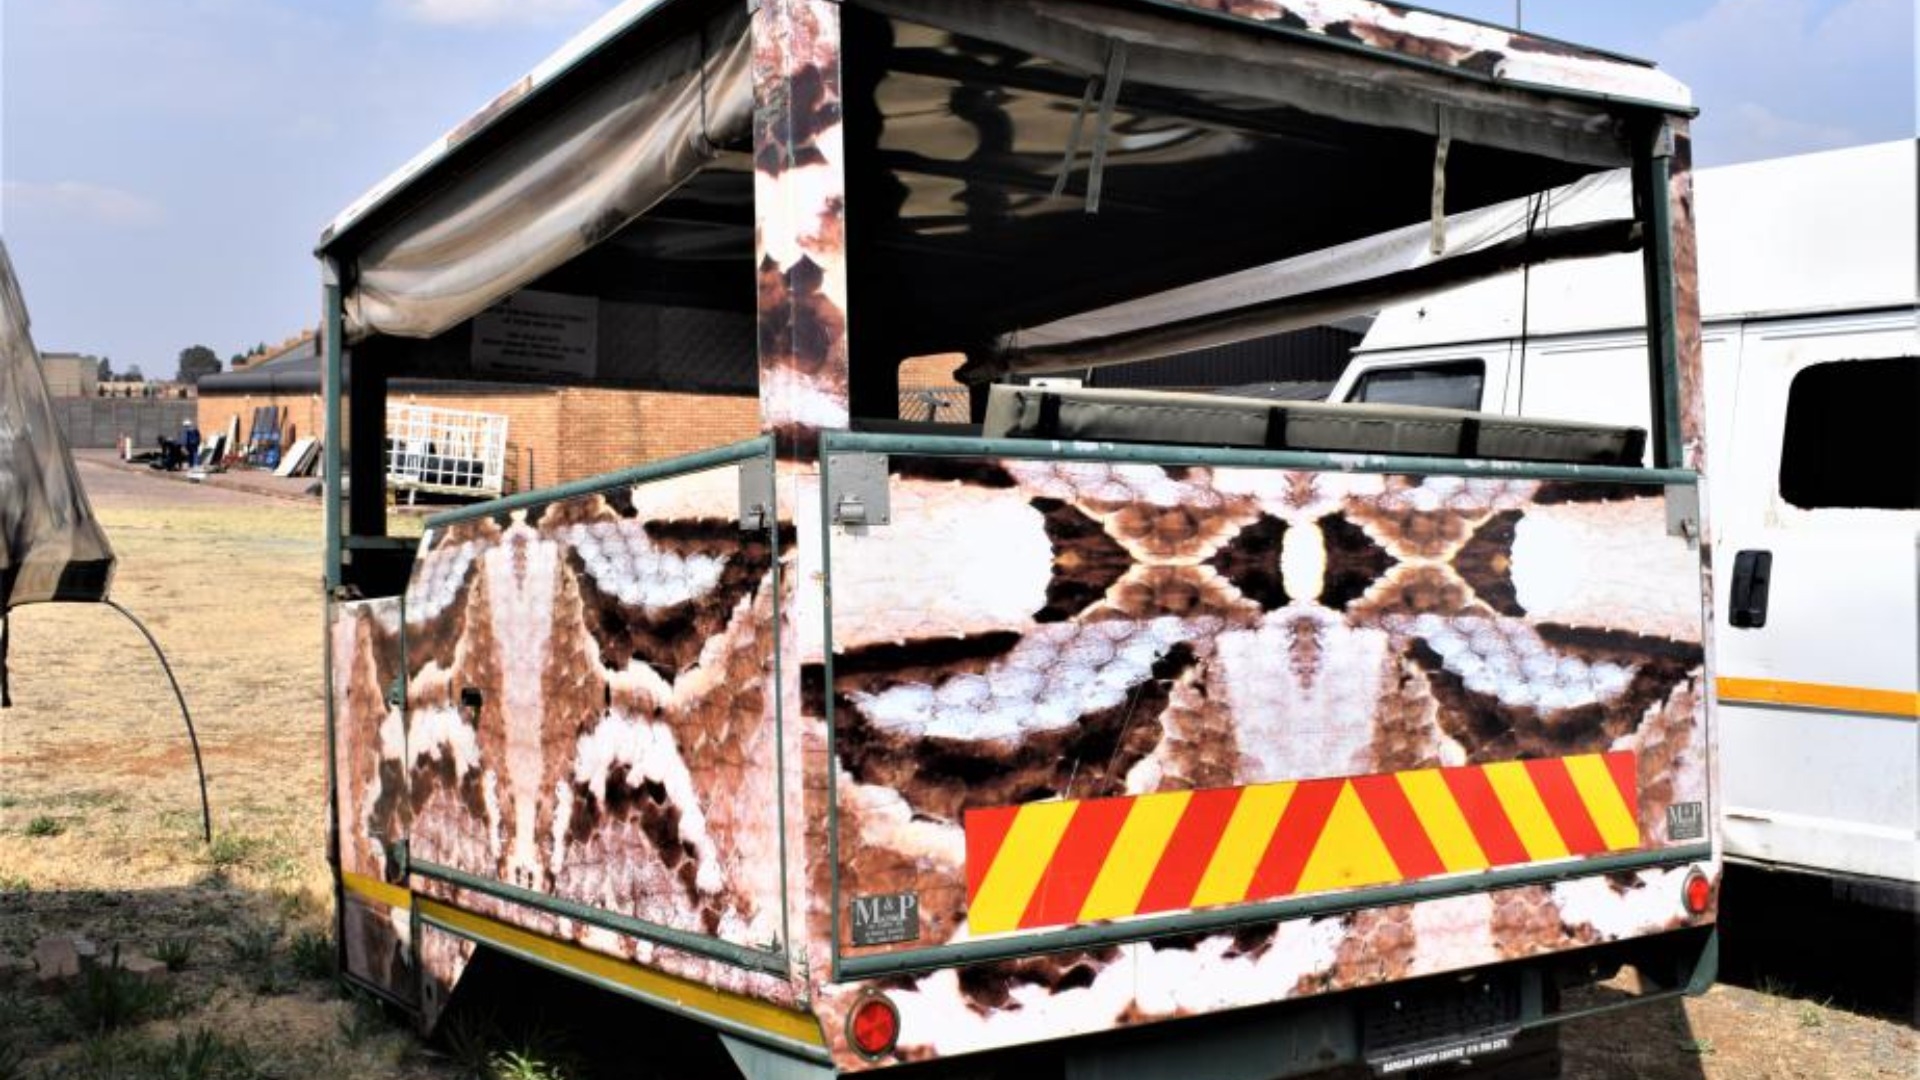 Game trailer Safari Game Drive Body with 12 Seats 2007 for sale by Pristine Motors Trucks | Truck & Trailer Marketplaces